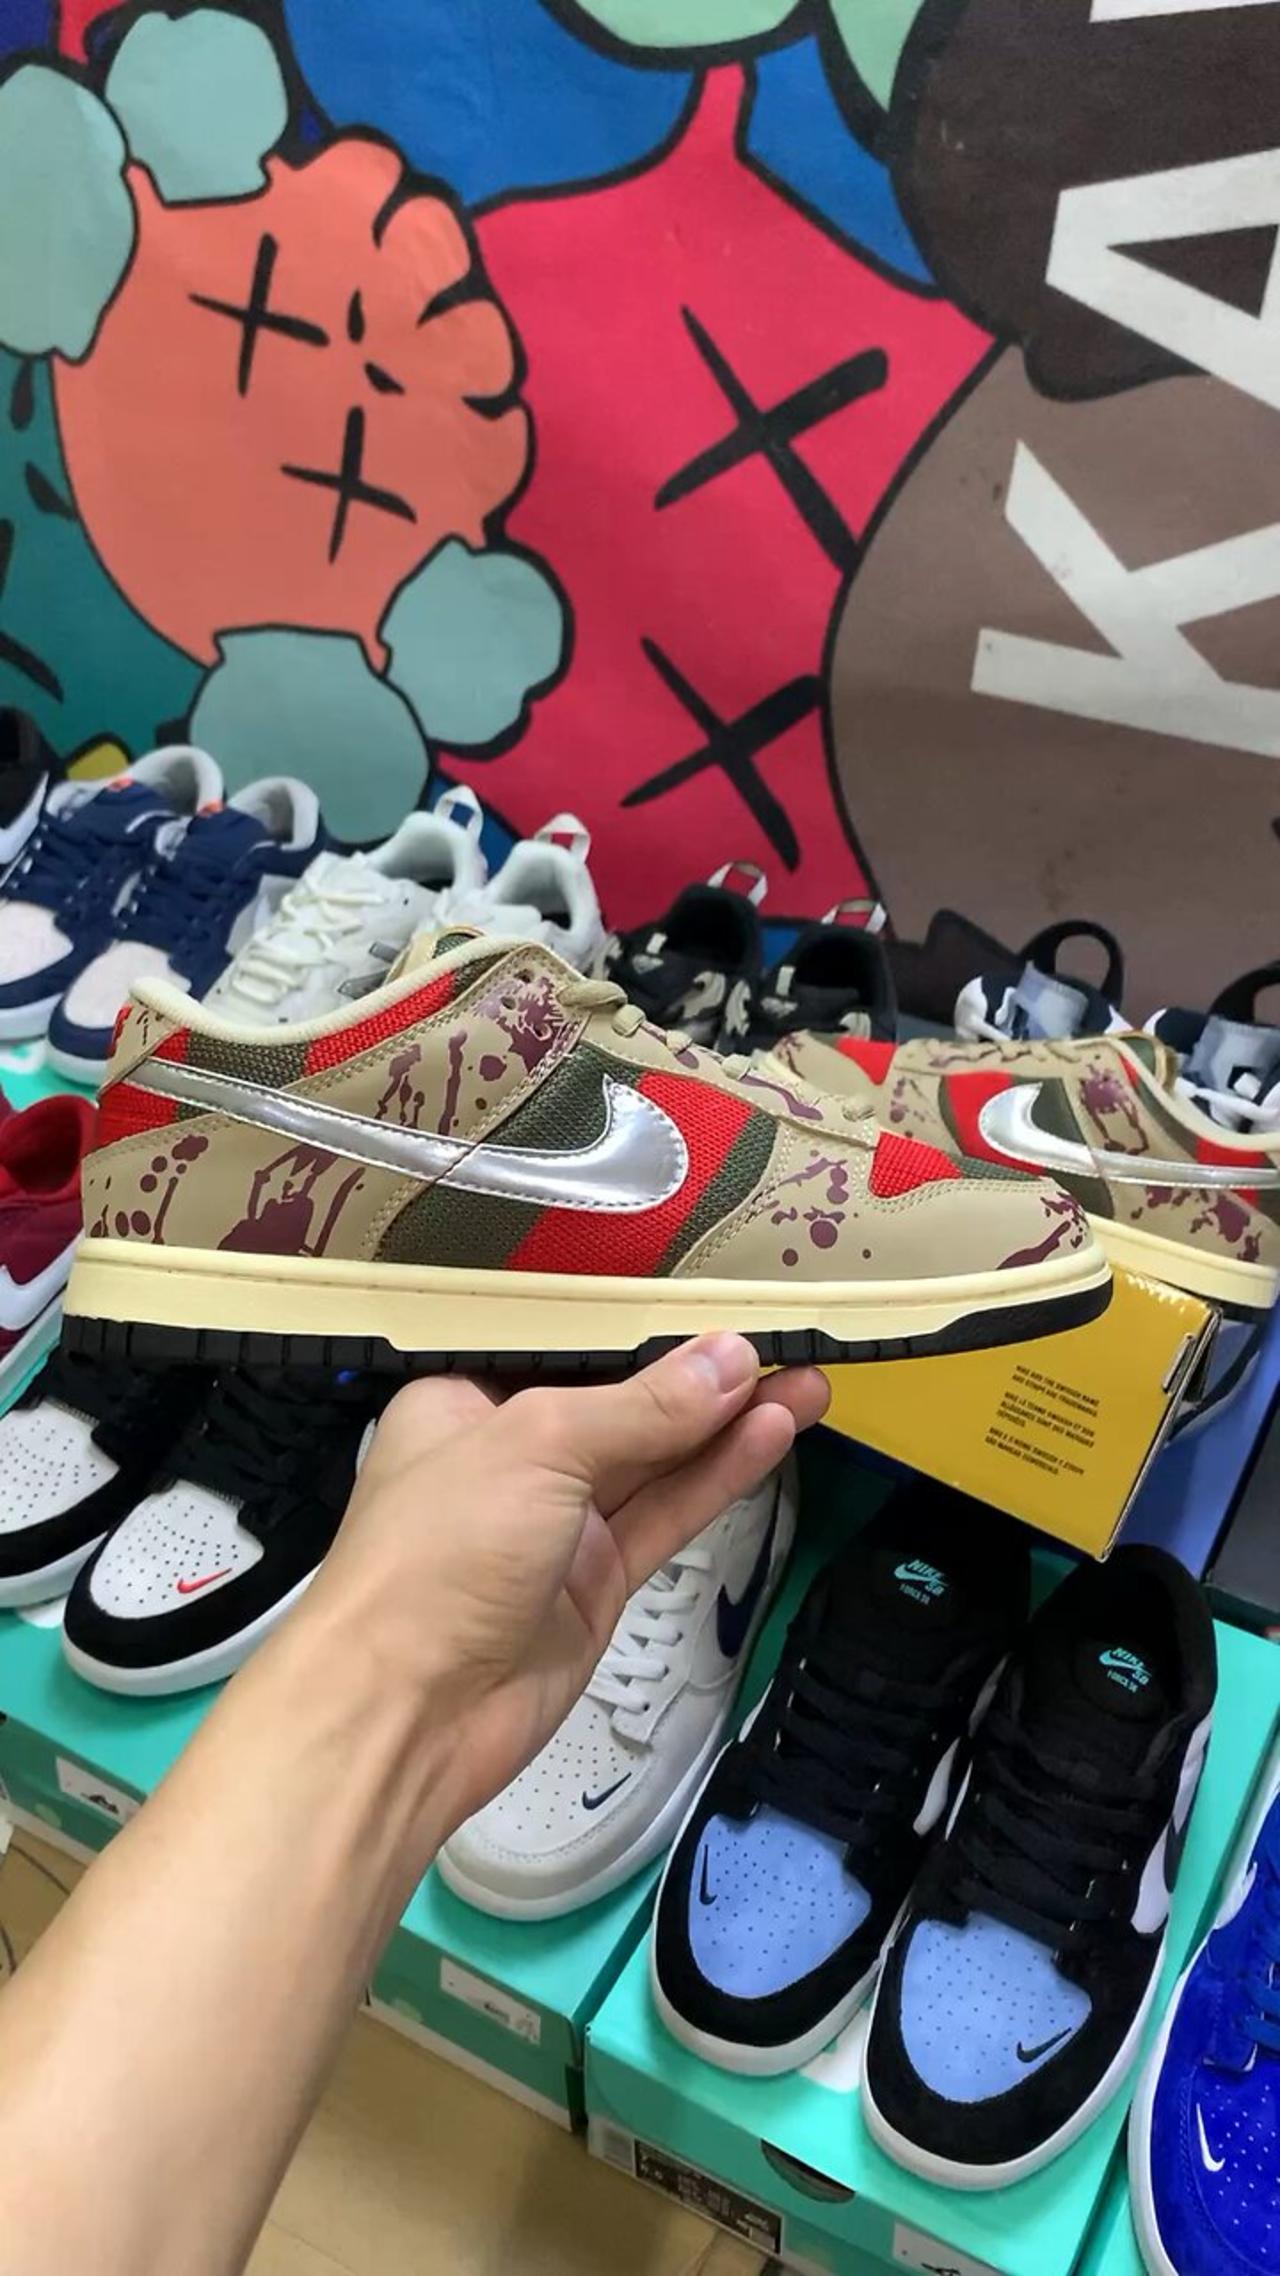 I bought this replica Nike Dunk SB Low "Freddy Krueger"  shoes from WhatsApp +8618181990058